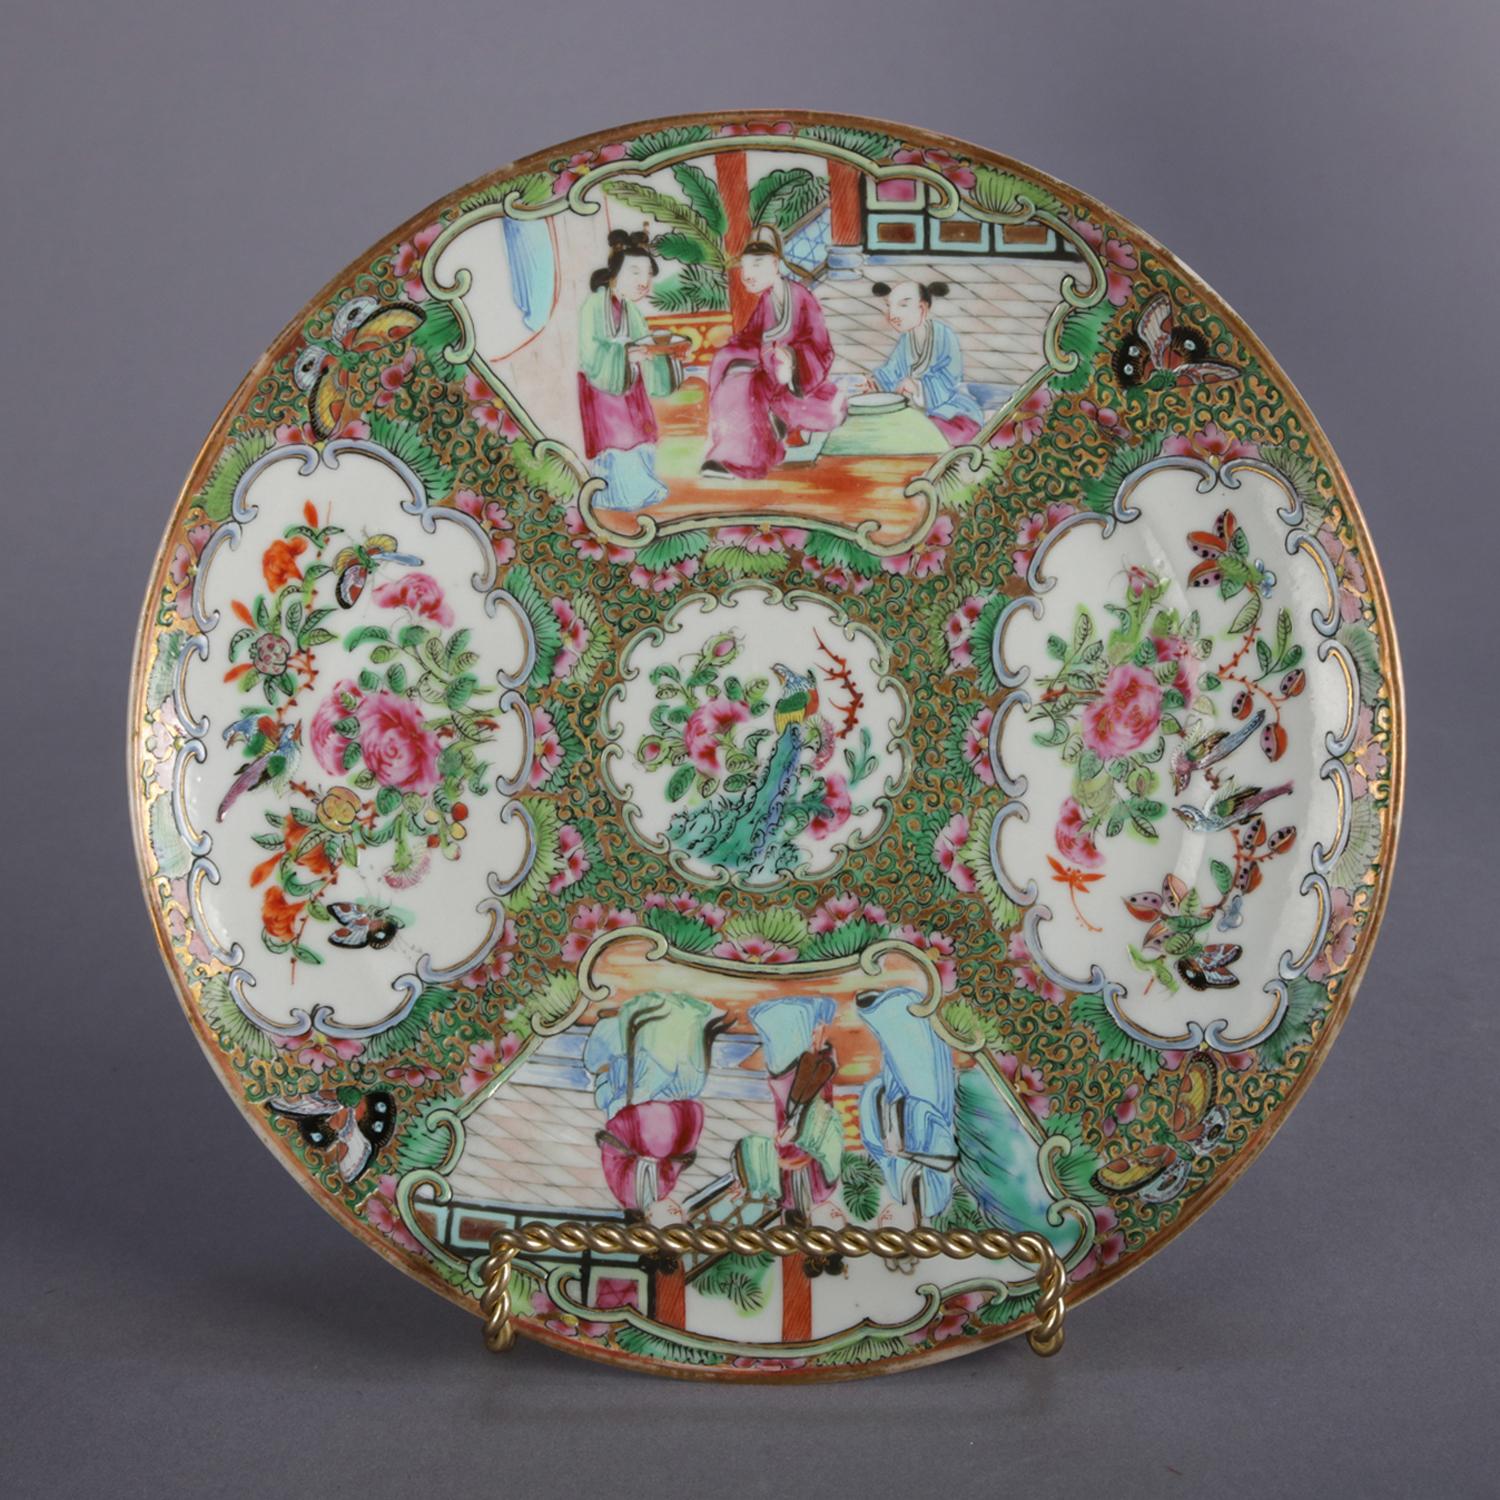 34 piece lot of antique Chinese Rose medallion hand enameled porcelain dining set includes a variety of patterns with traditional panels of village scenes and floral with borders having foliate and gilt highlights, circa 1900.

Set includes:
One